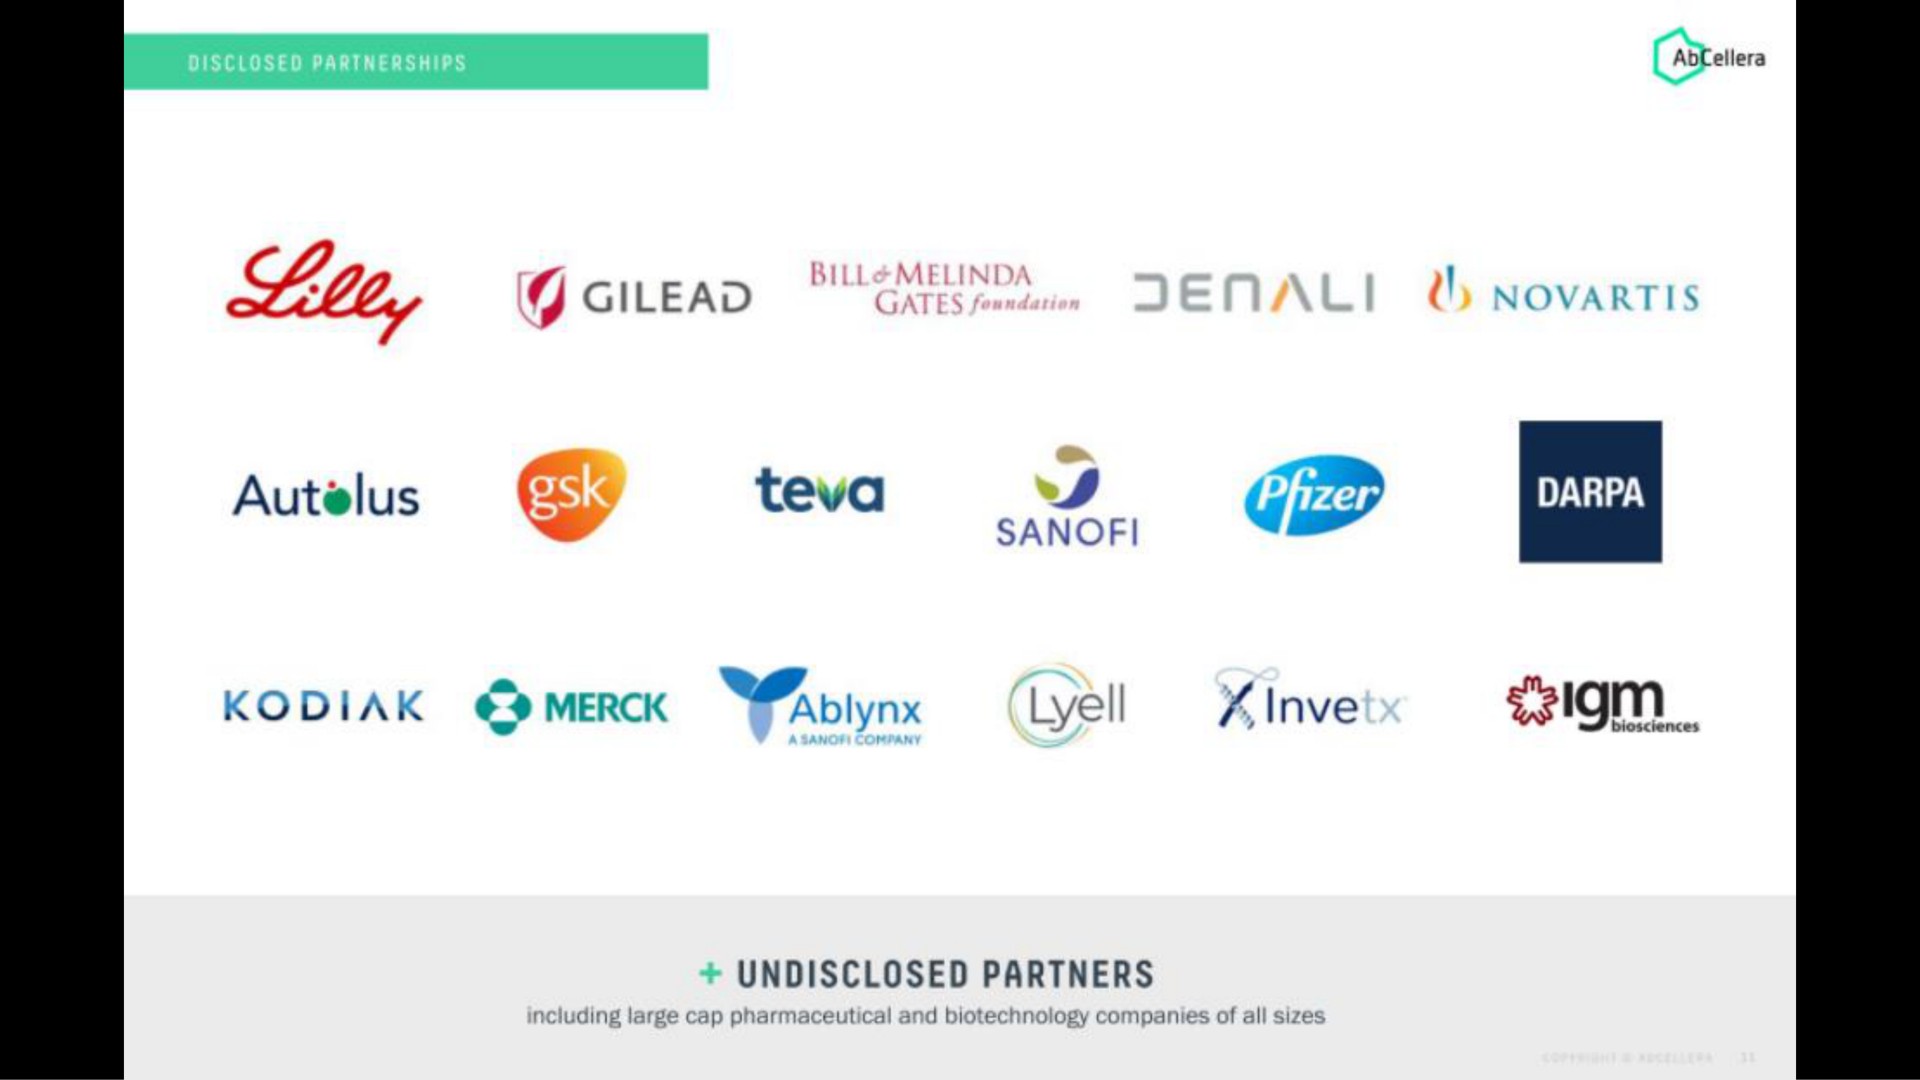 kit gat sizes undisclosed partners large cap pharmaceutical and companies of all | AbCellera